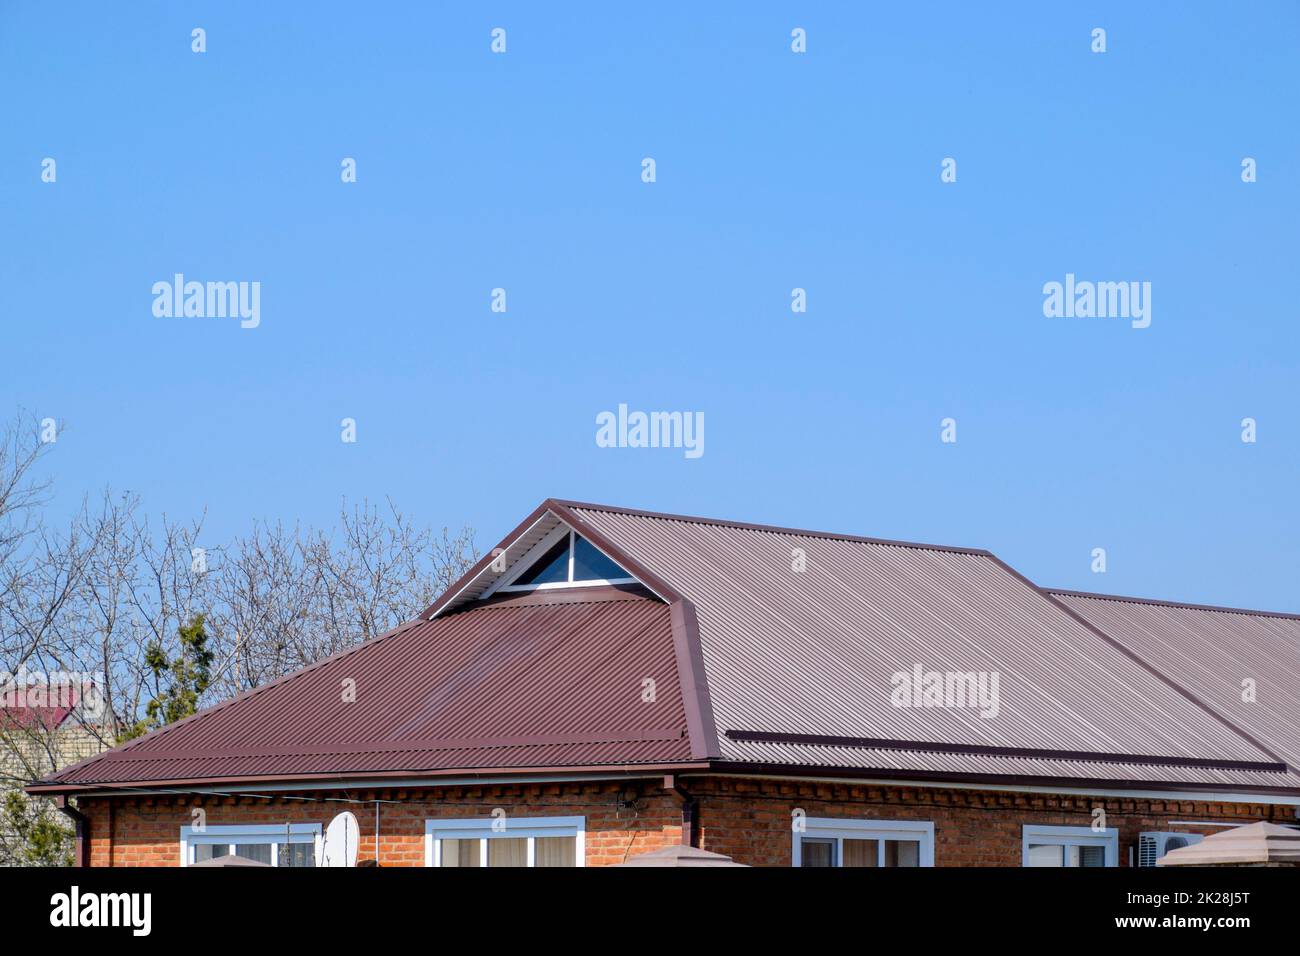 Metal roof brown. Construction of houses and types of roofing. Stock Photo